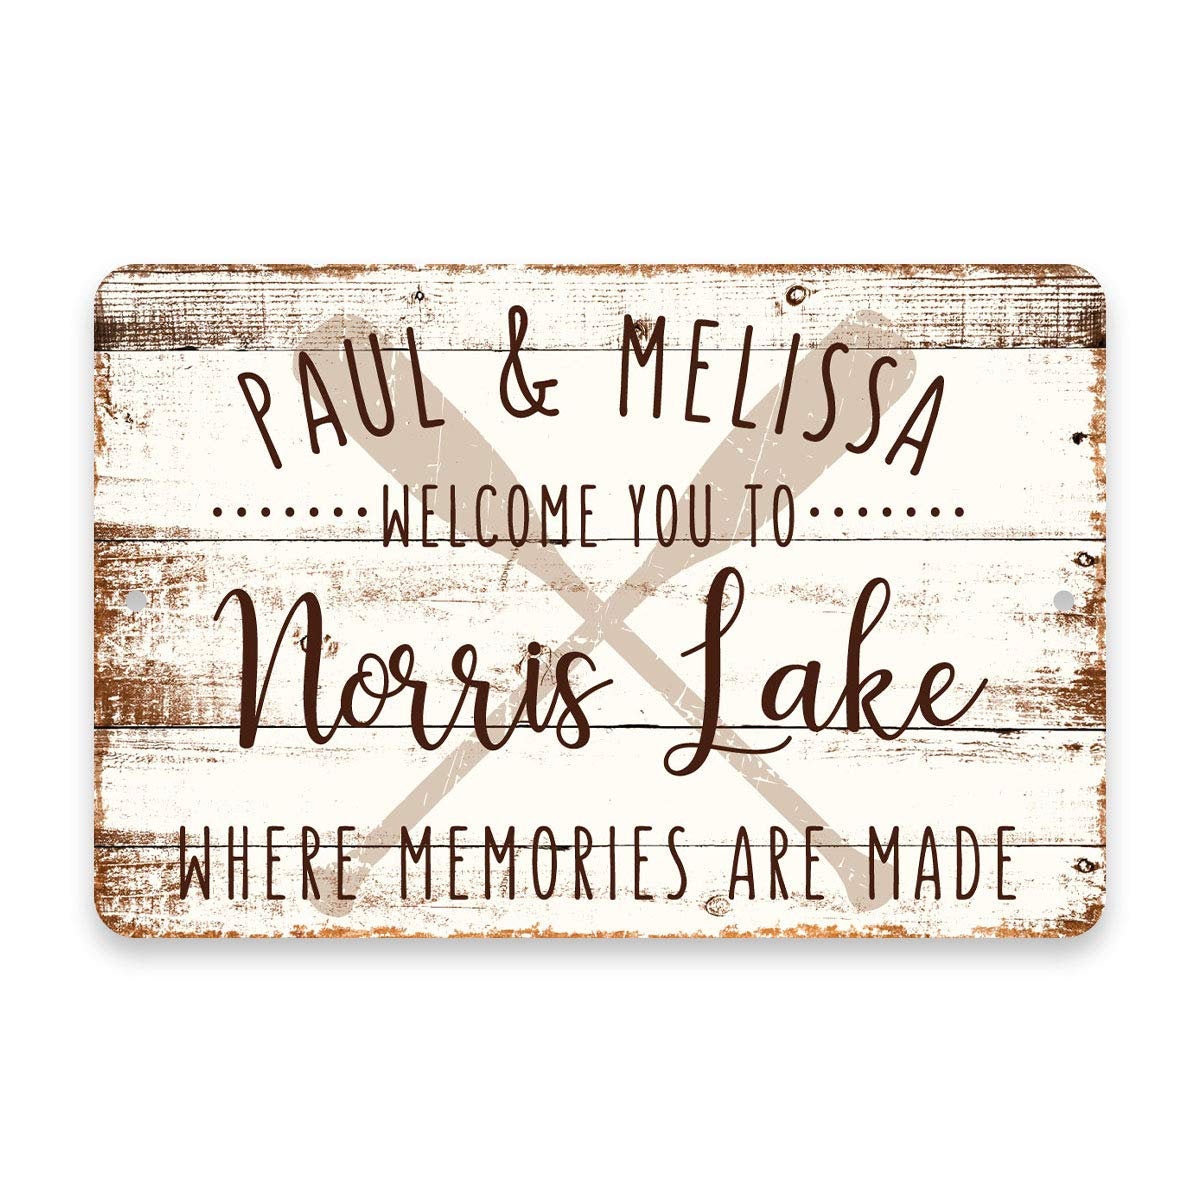 Personalized Welcome to Norris Lake Where Memories are Made Sign - 8 X 12 Metal Sign with Wood Look